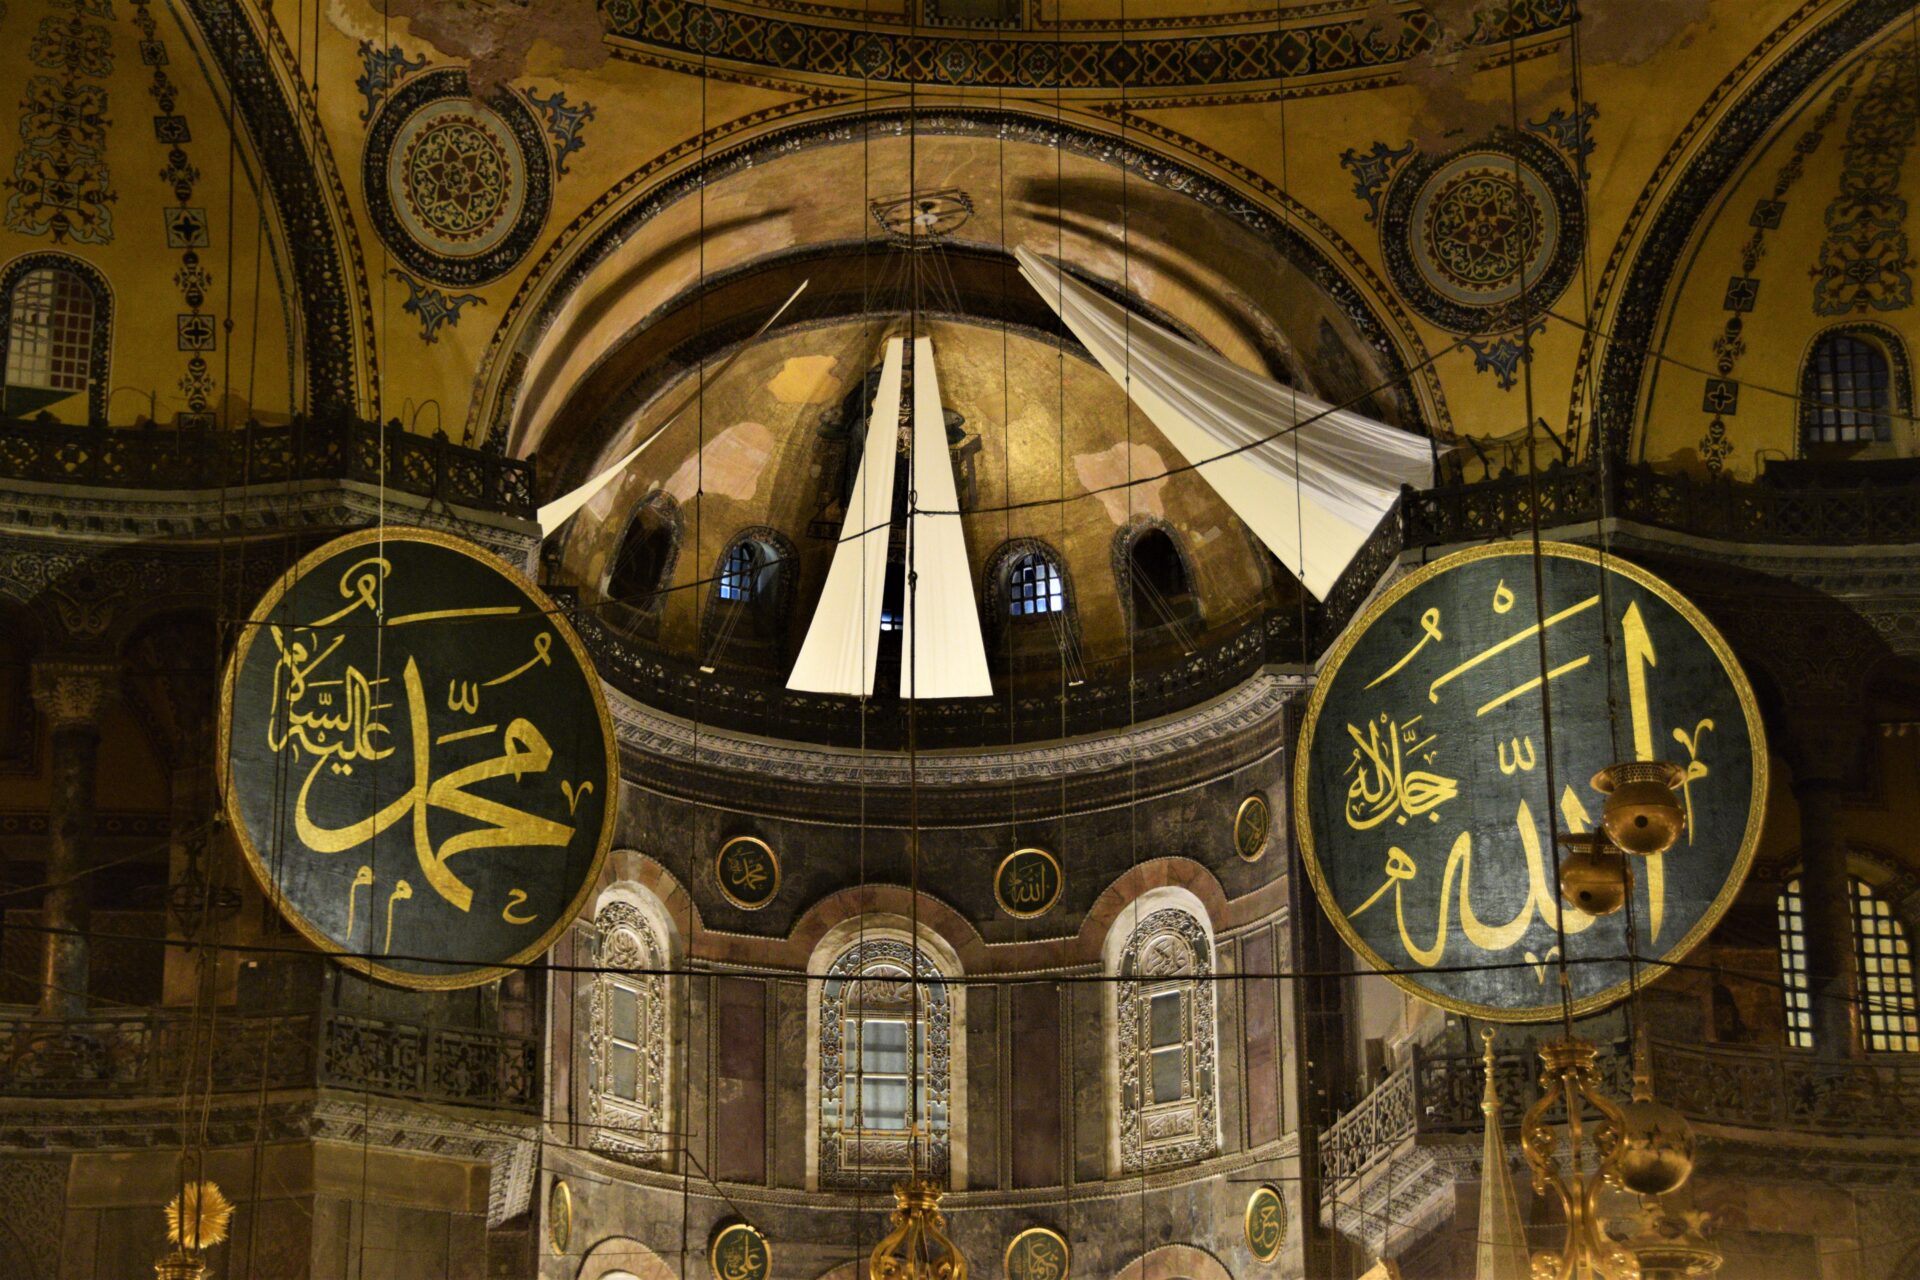 two big green discs with golde nframe and letters, depicting the names of the prophet Mohammed and Allah, hang inside the Hagia Sophia